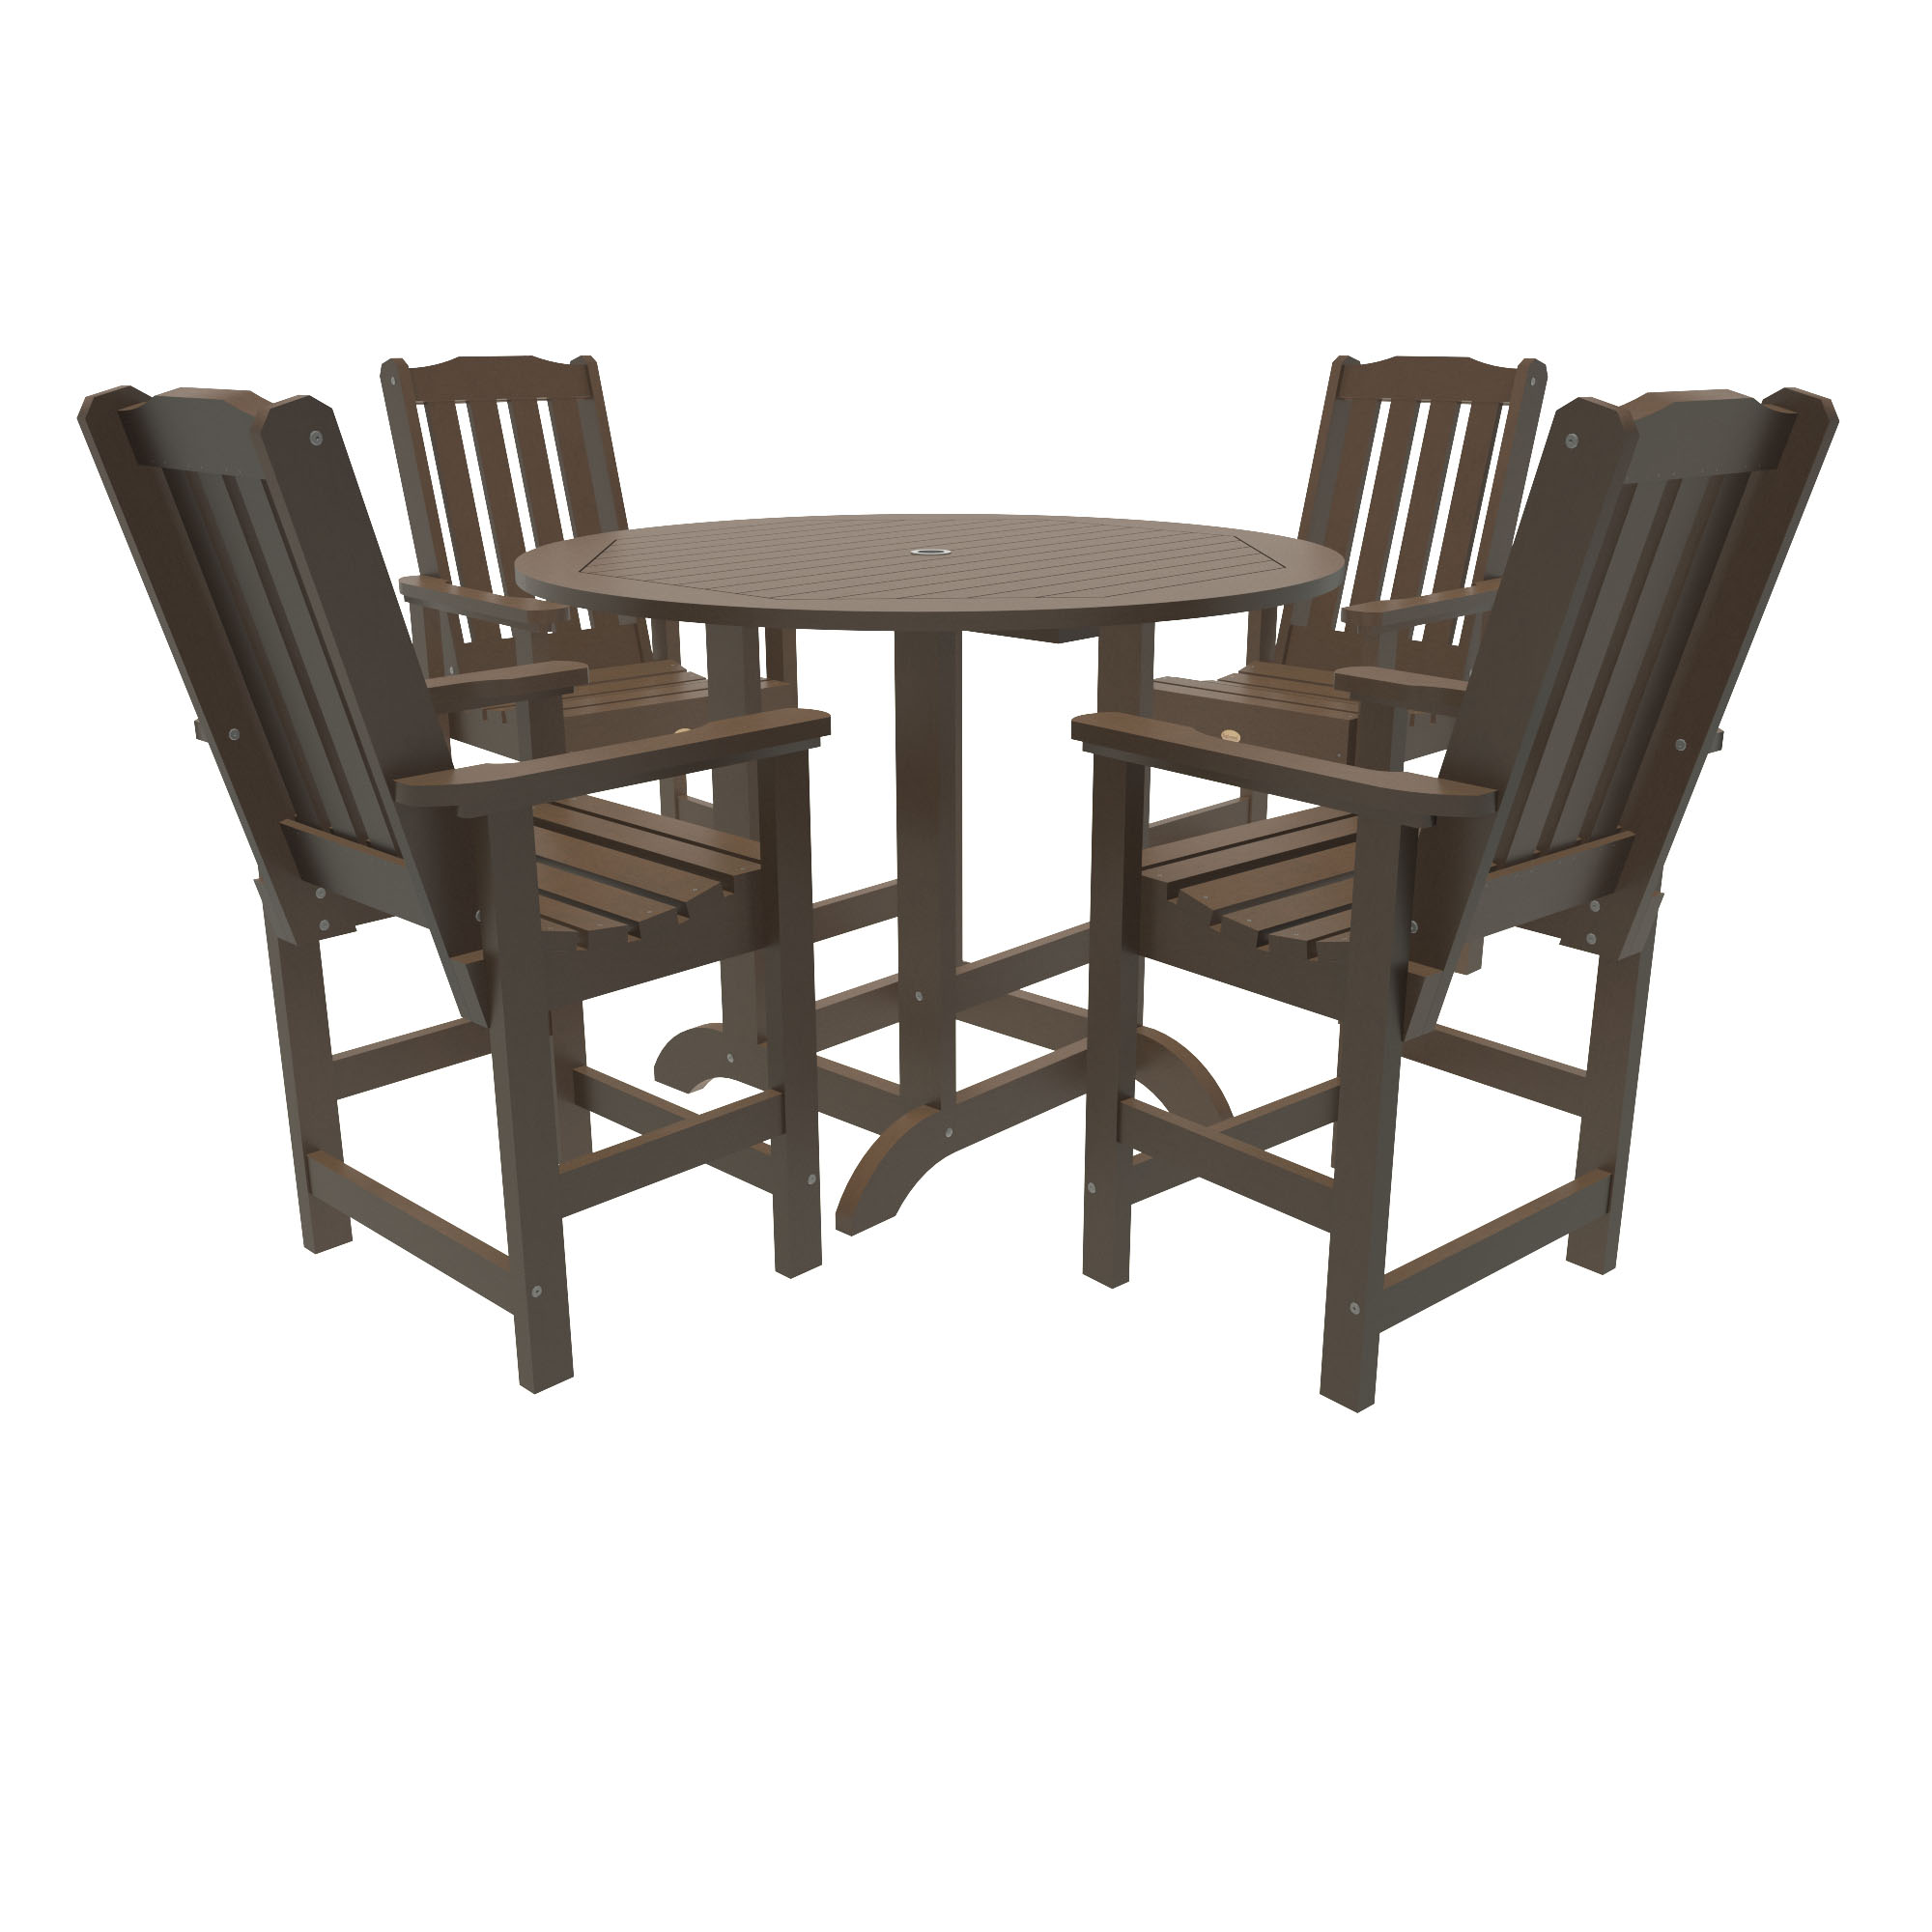 Highwood 5pc Lehigh Round Dining Set - Counter Height - image 1 of 7